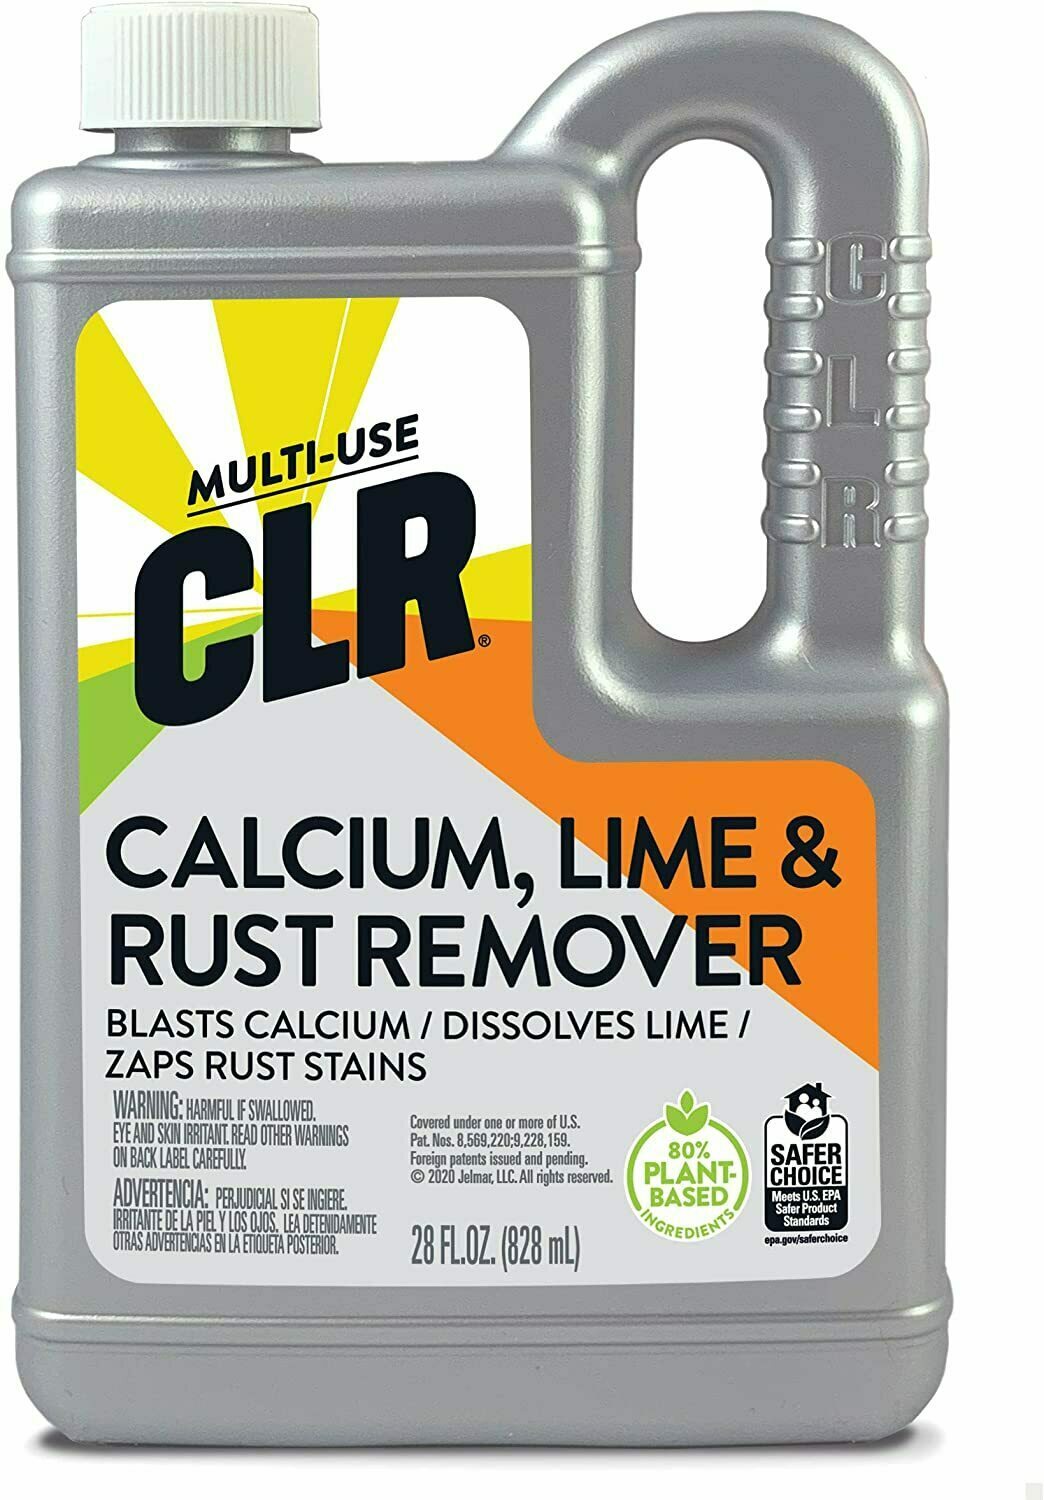 CLR Calcium Lime and Rust Remover